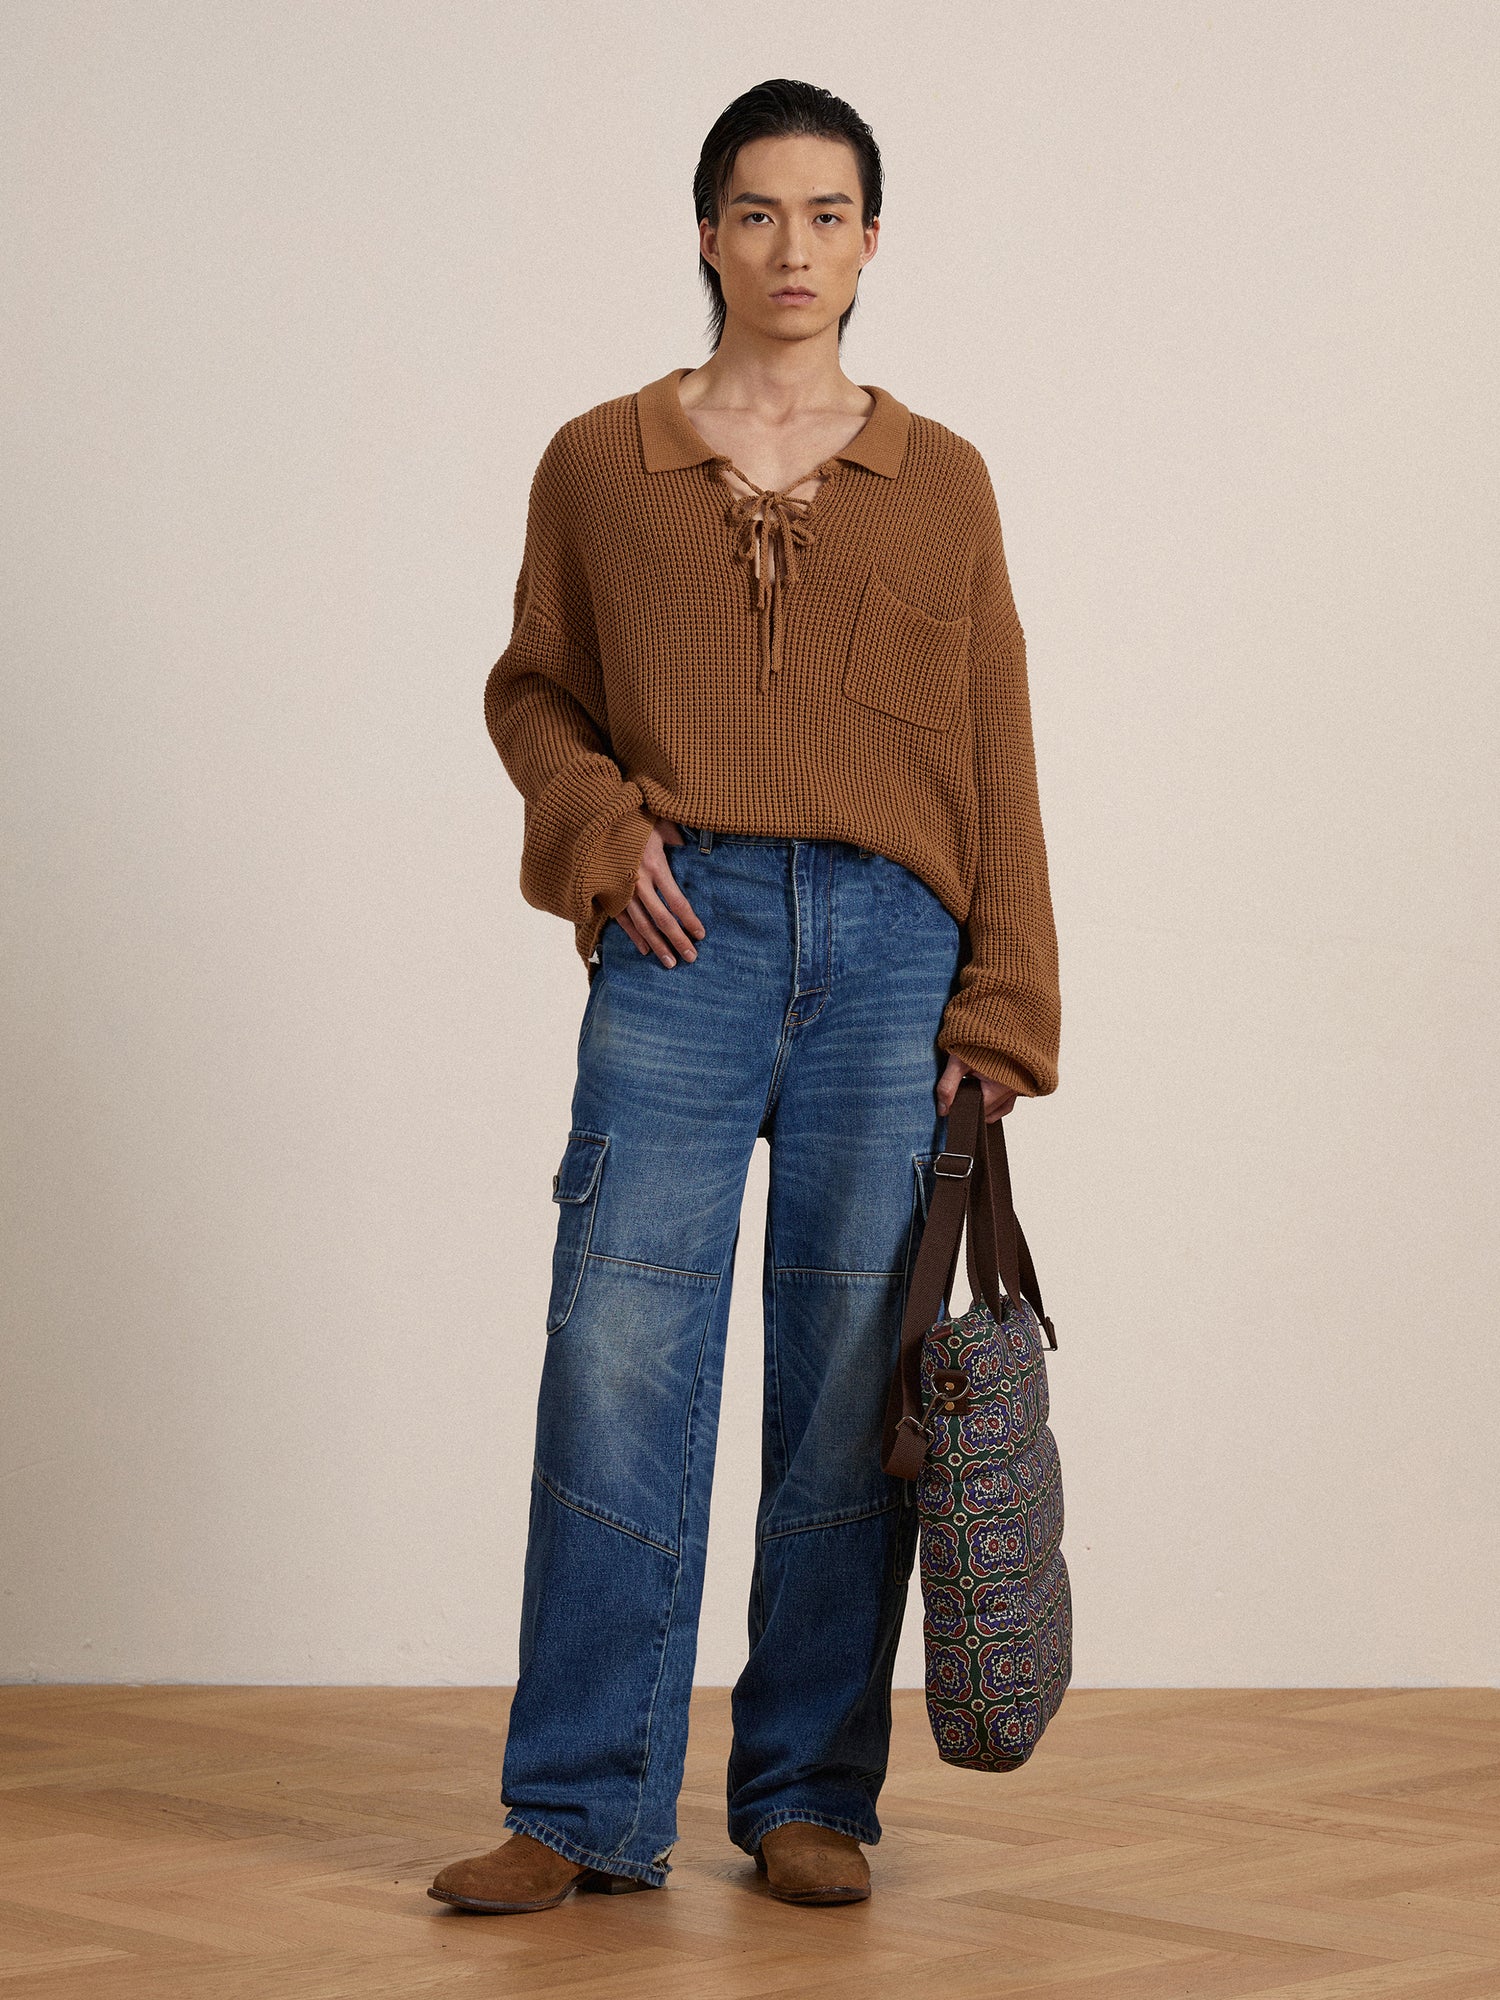 A person in a brown knitted top and Found Siwa Cargo Paneled Jeans, holding a patterned bag, stands in a neutral-toned room.